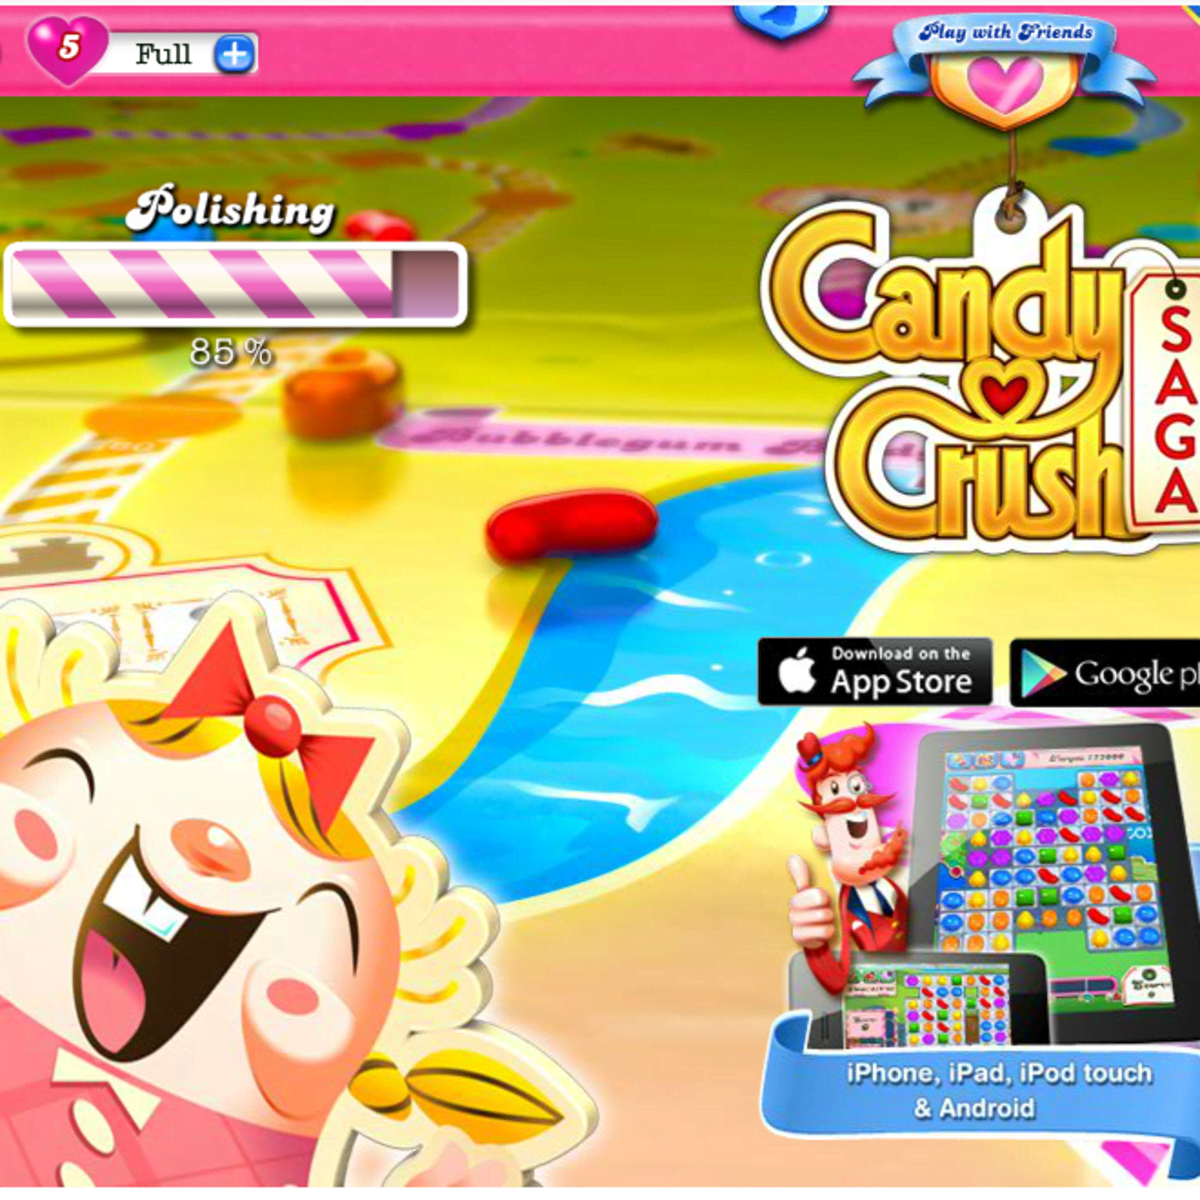 How to Fix Candy Crush Not Working On Facebook 2023 